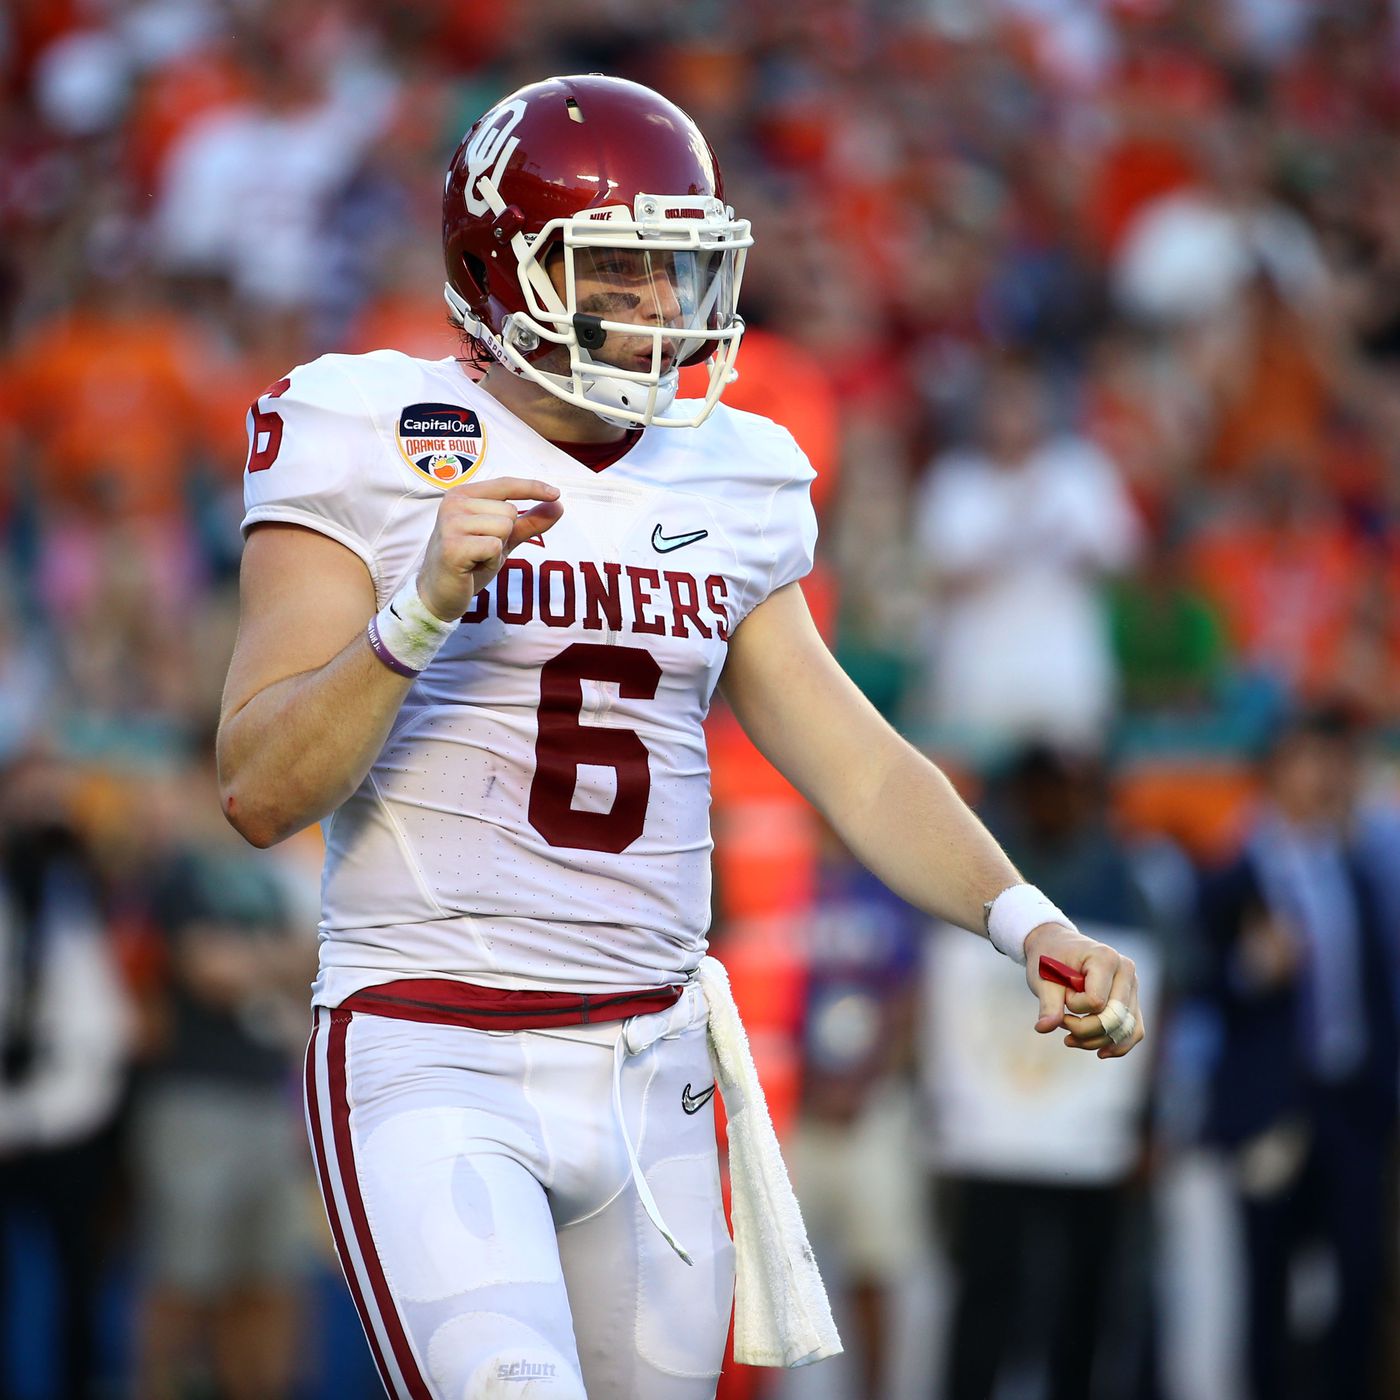 No Redshirt For 2014: A Baker Mayfield Situation - Crimson And Cream Machine